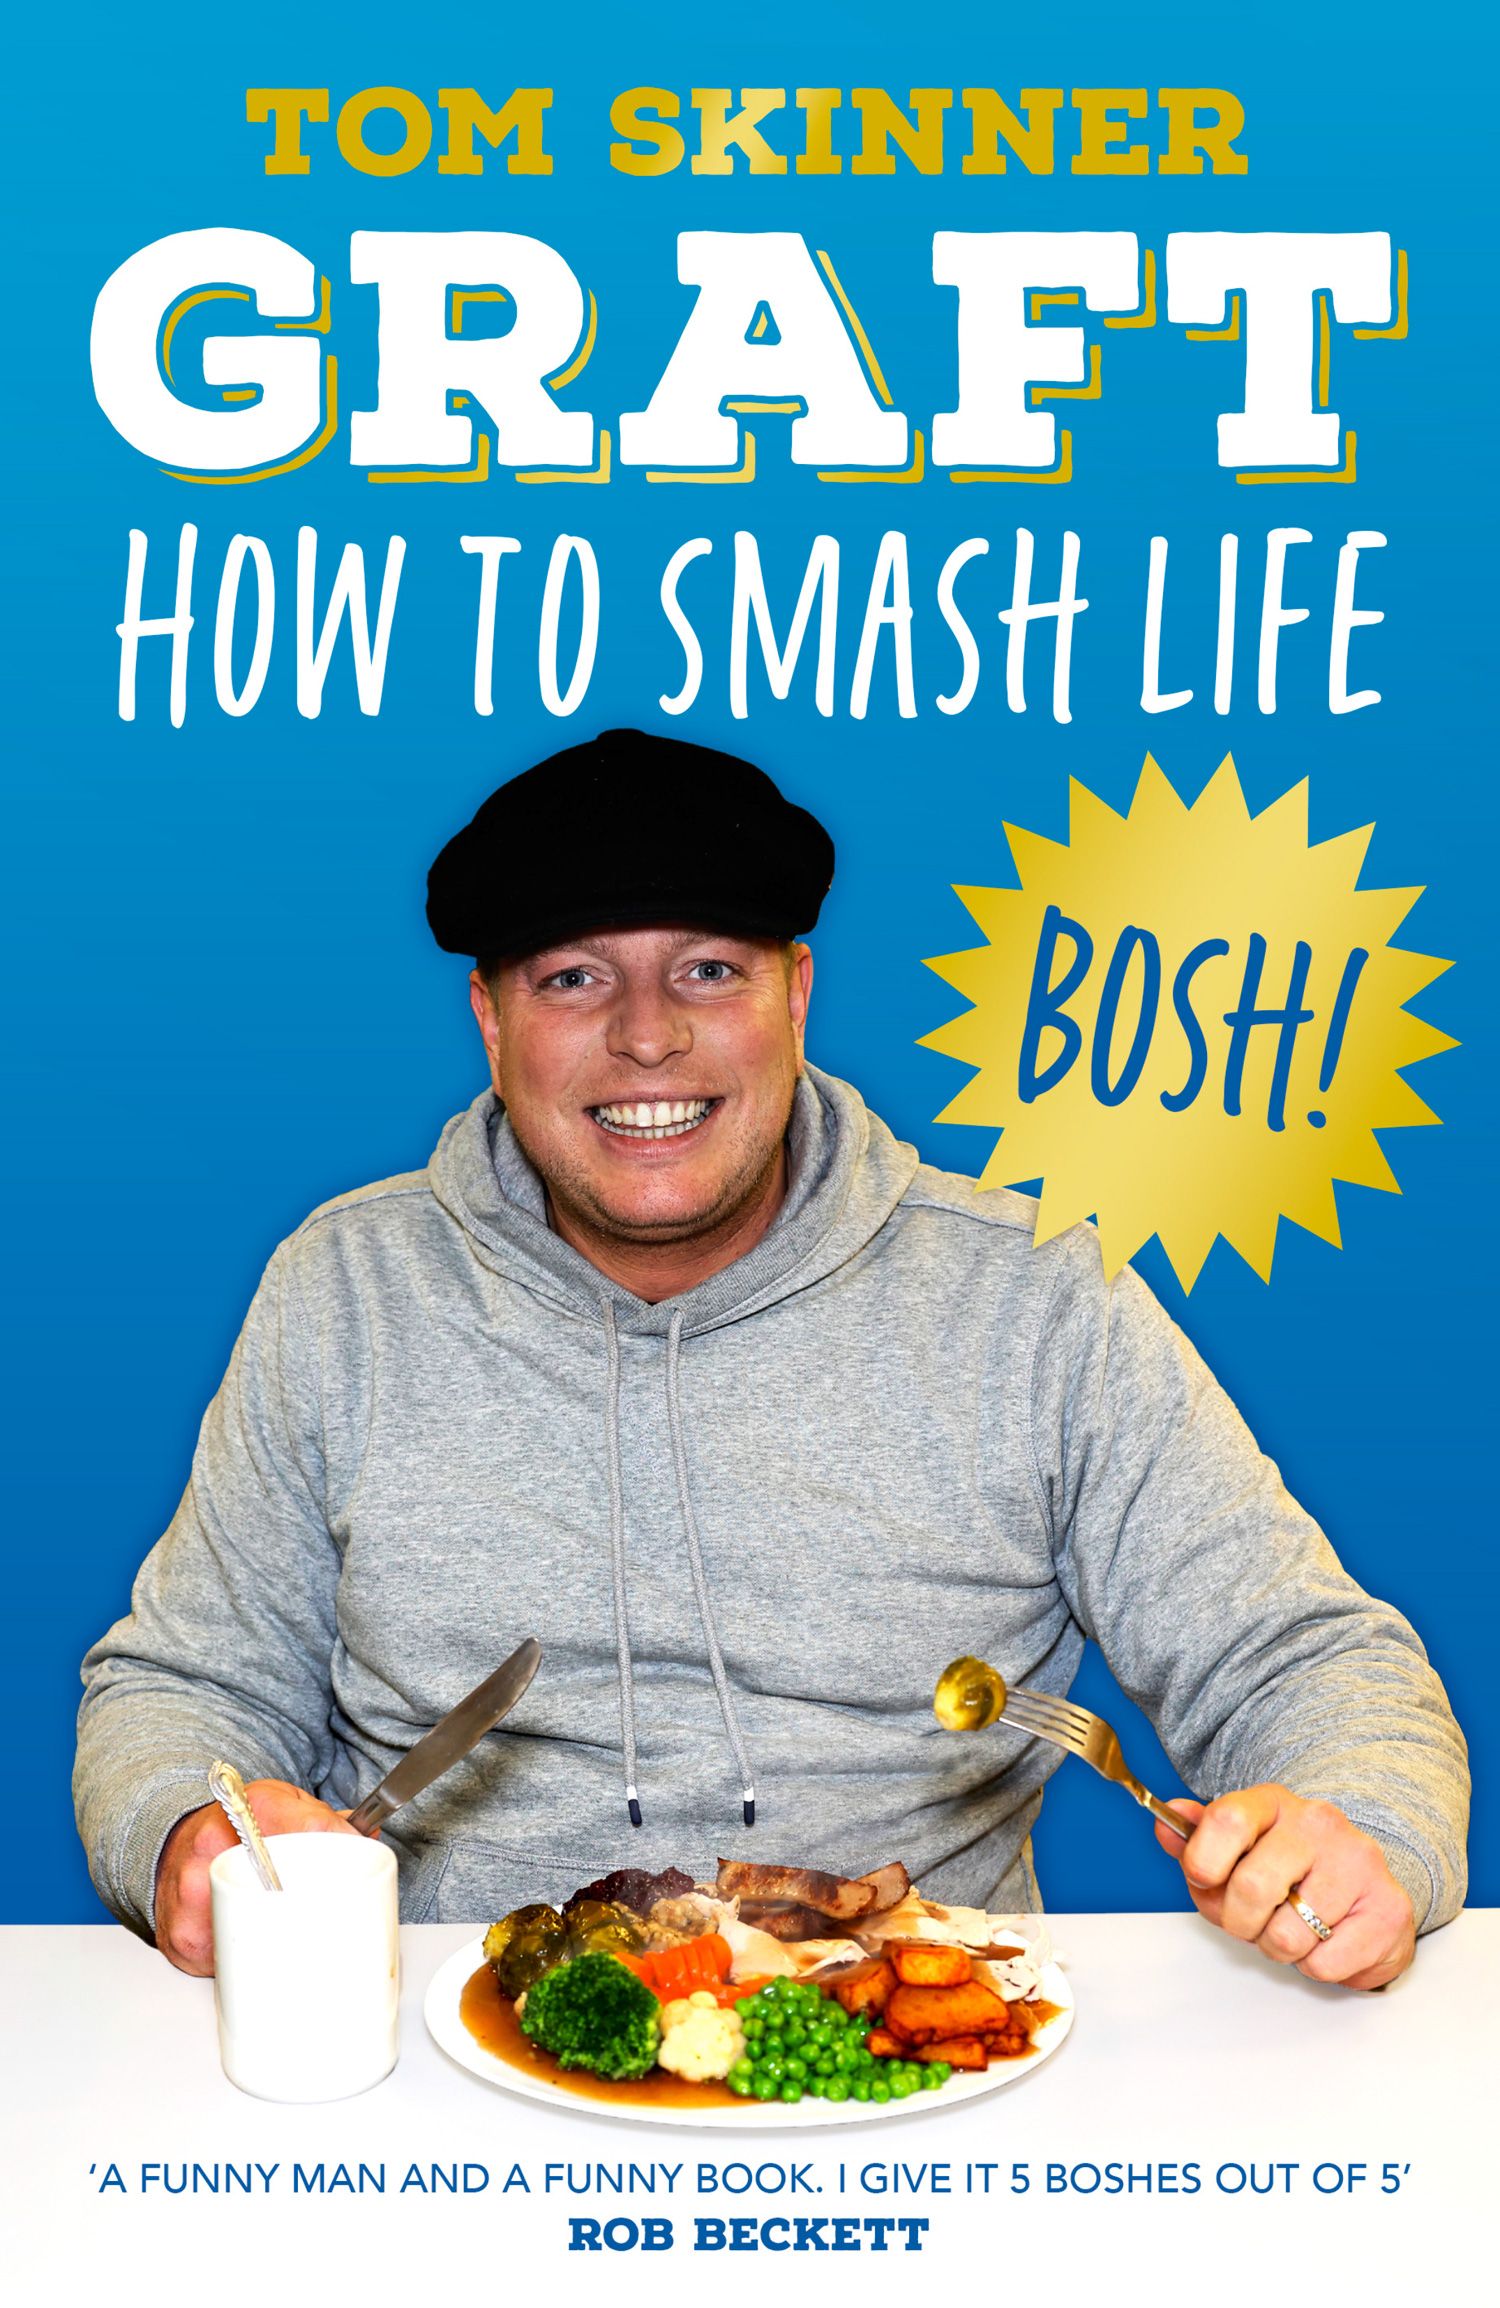 How to make a smash book (and why you'd want to!)